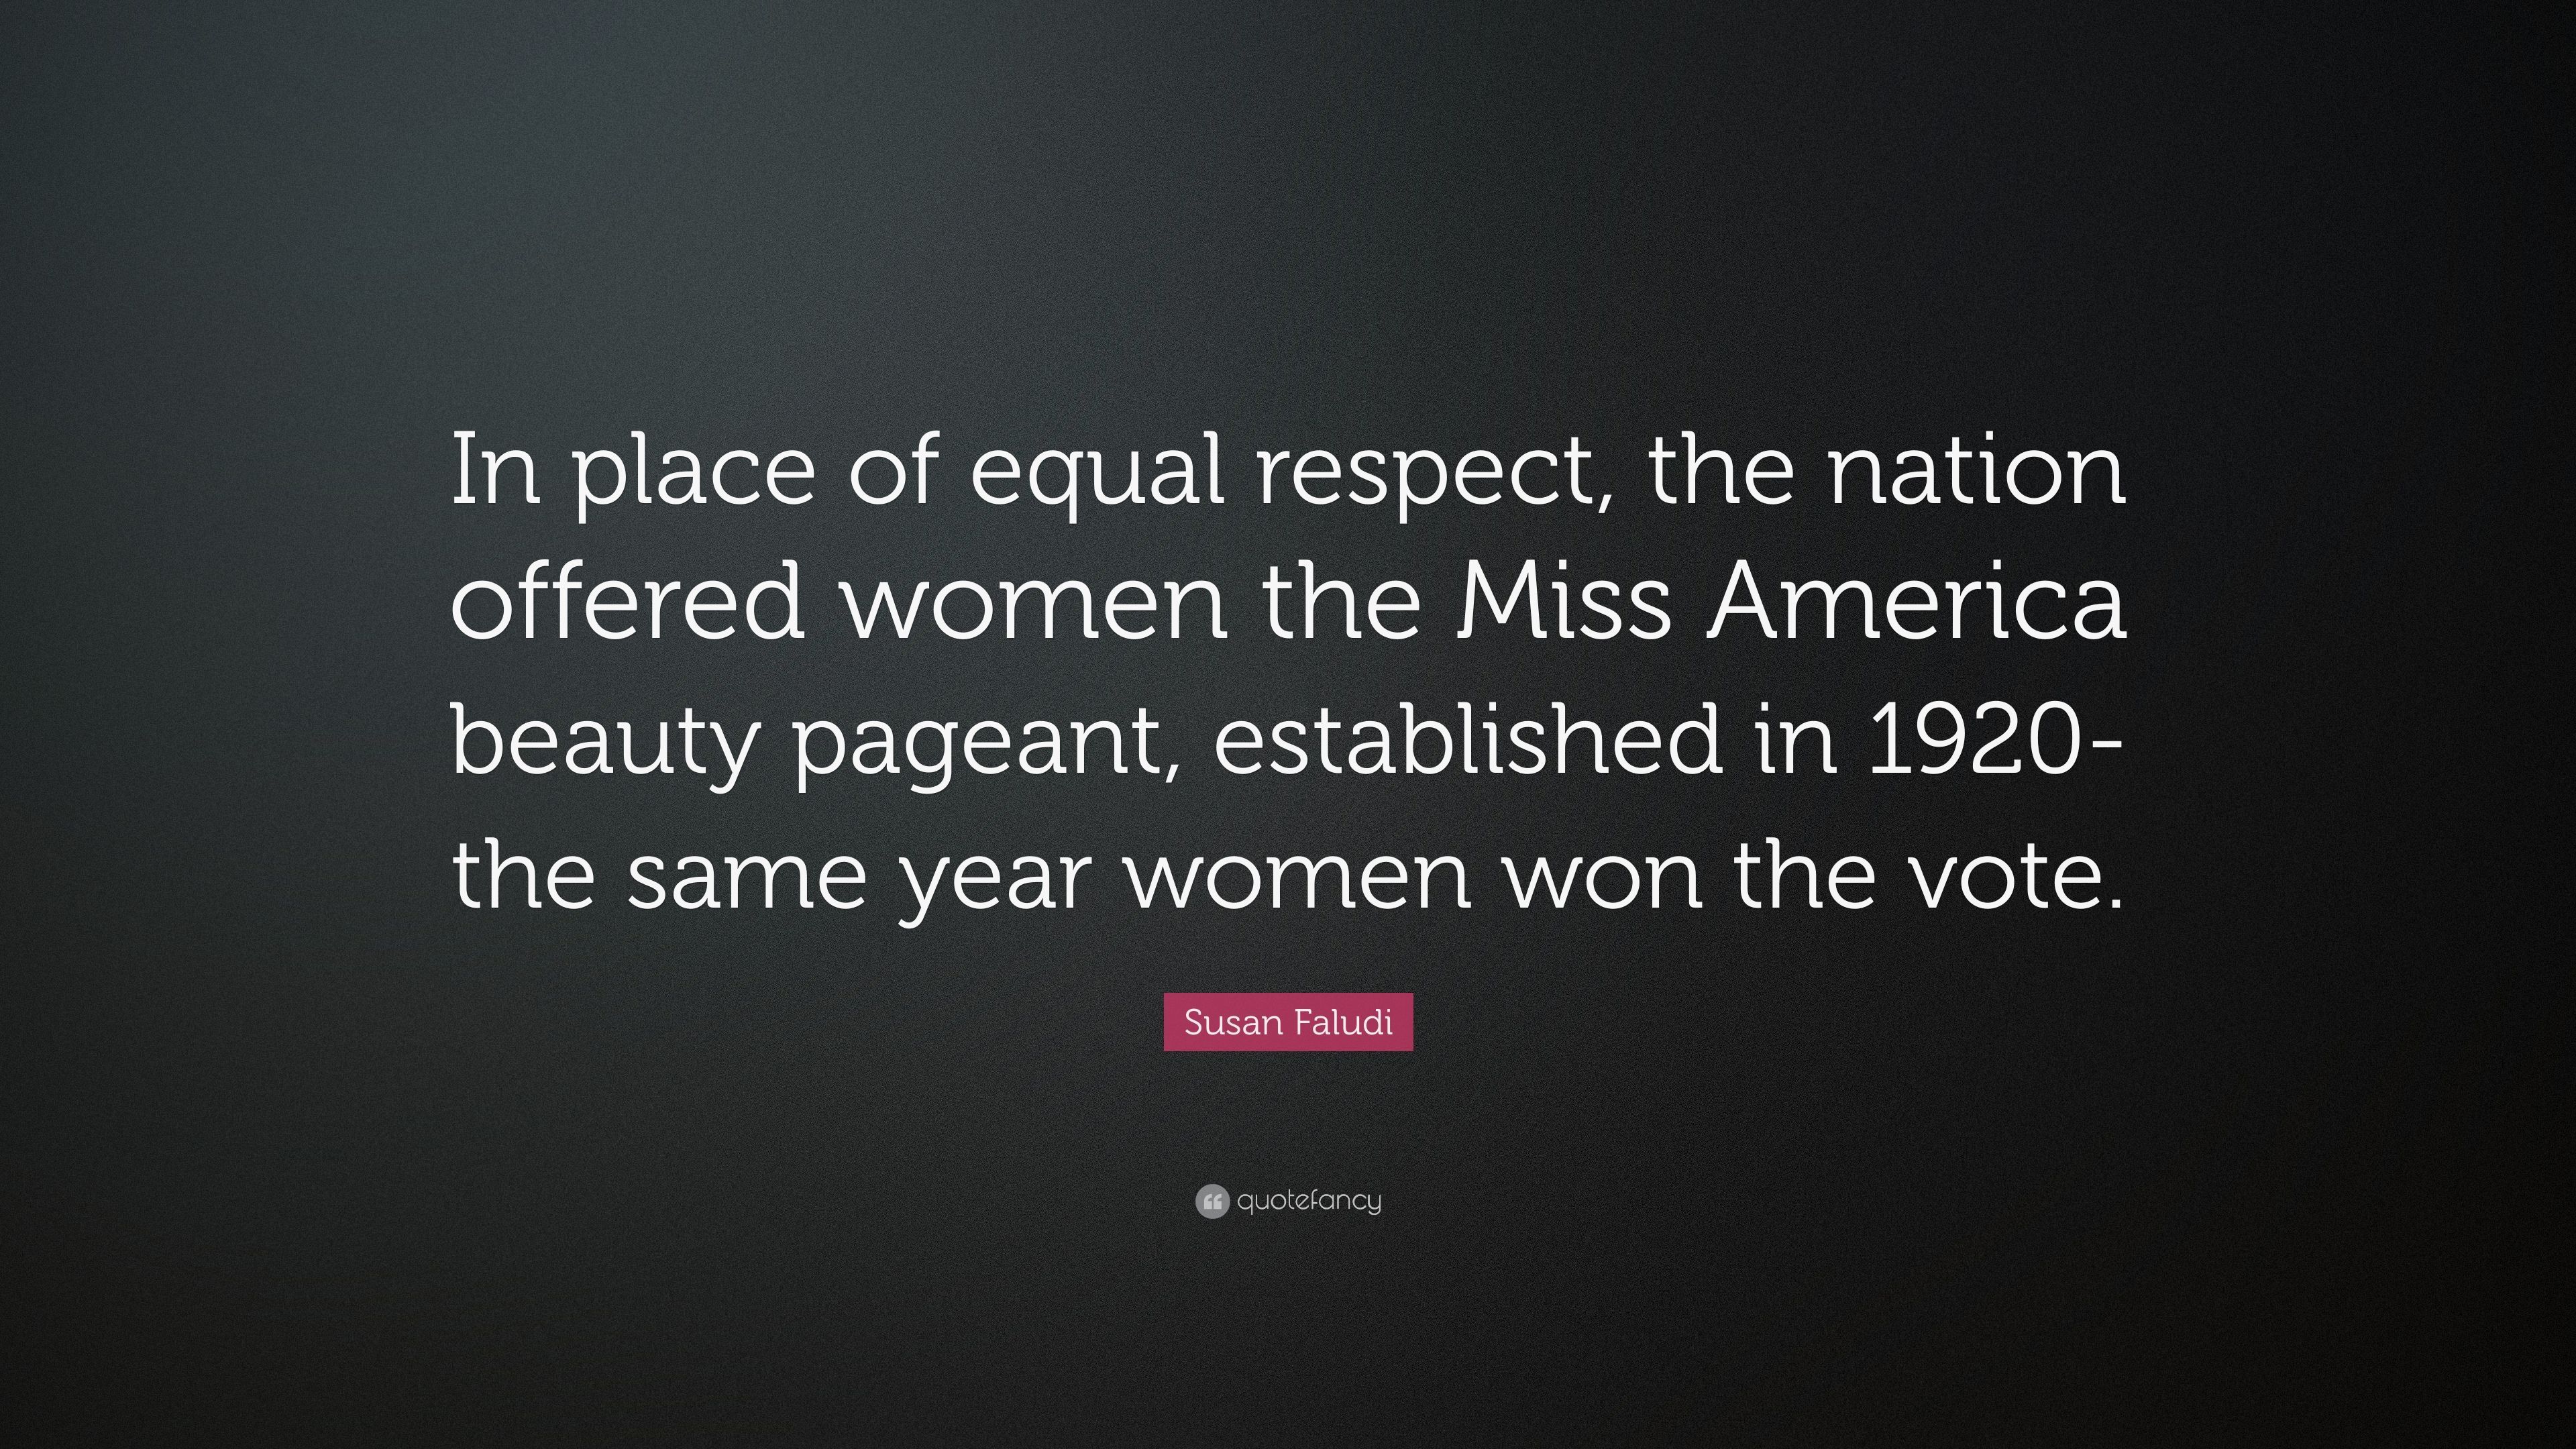 Susan Faludi Quote: “In place of equal respect, the nation offered